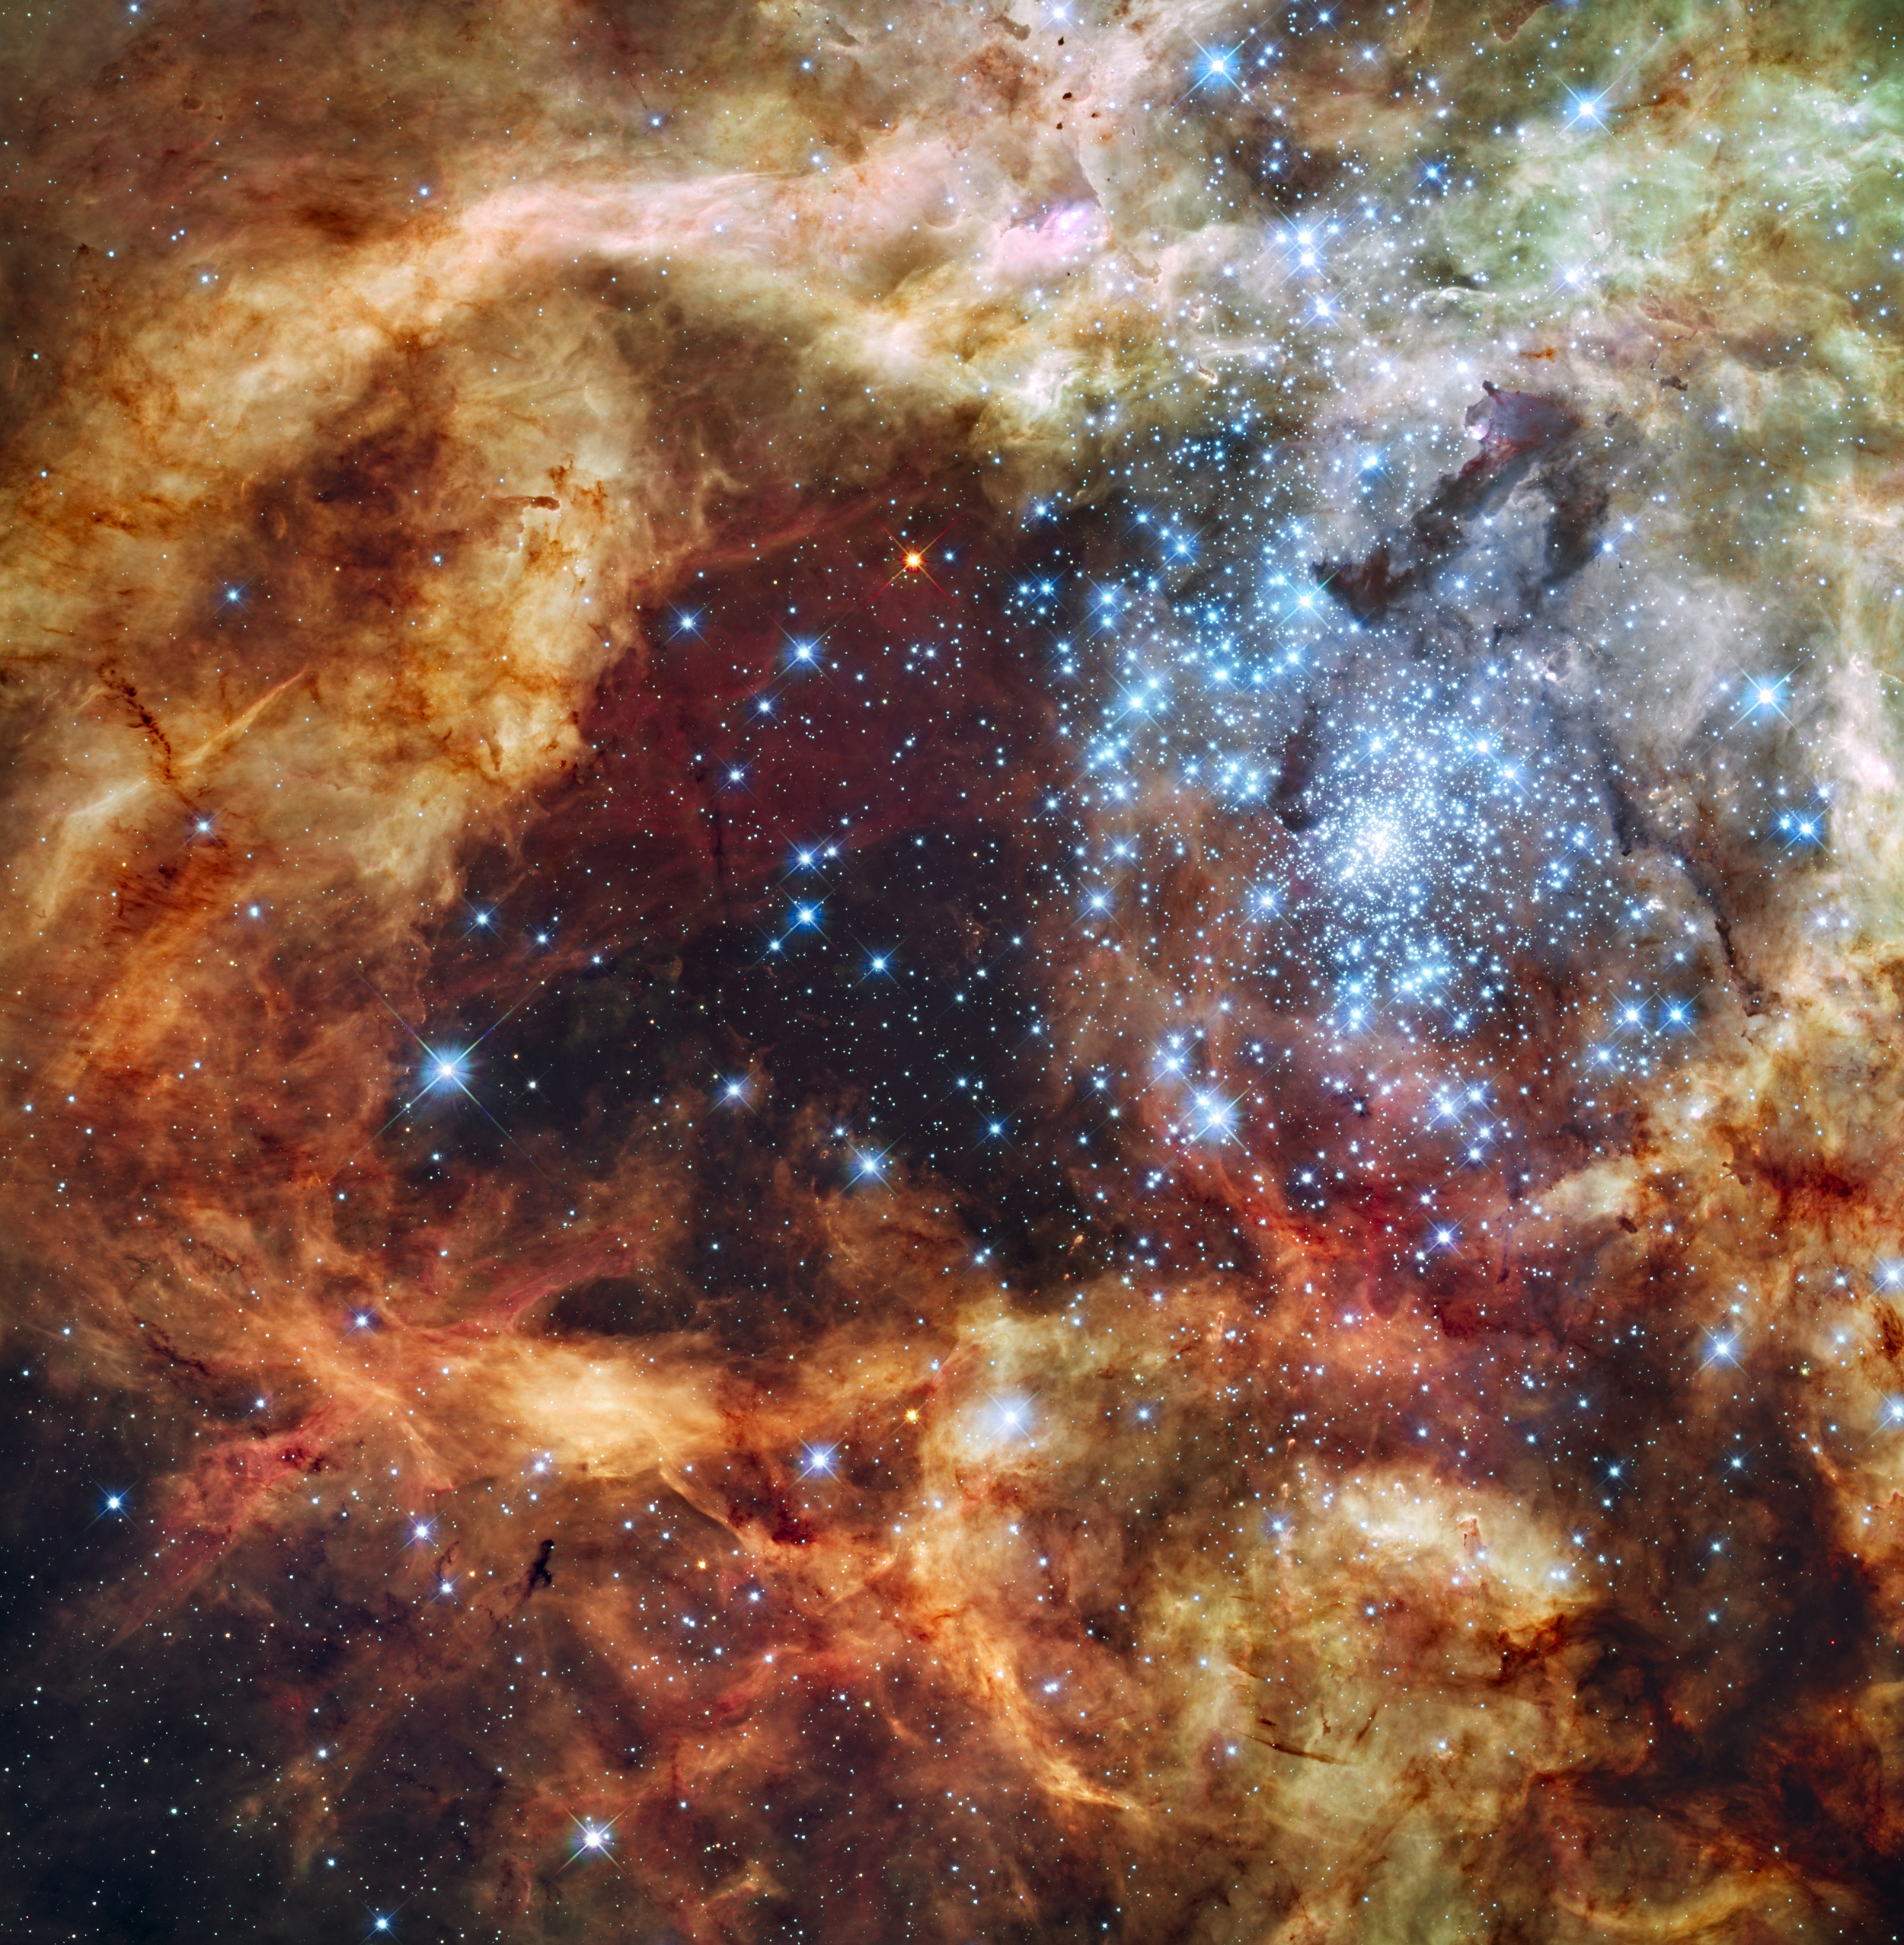  From the Hubble Space Telescope - Star Cluster R136 Bursts Out (Photo: NASA, ESA, & F. Paresce (INAF-IASF), R. O'Connell (U. Virginia), & the HST WFC3 Science Oversight Committee)